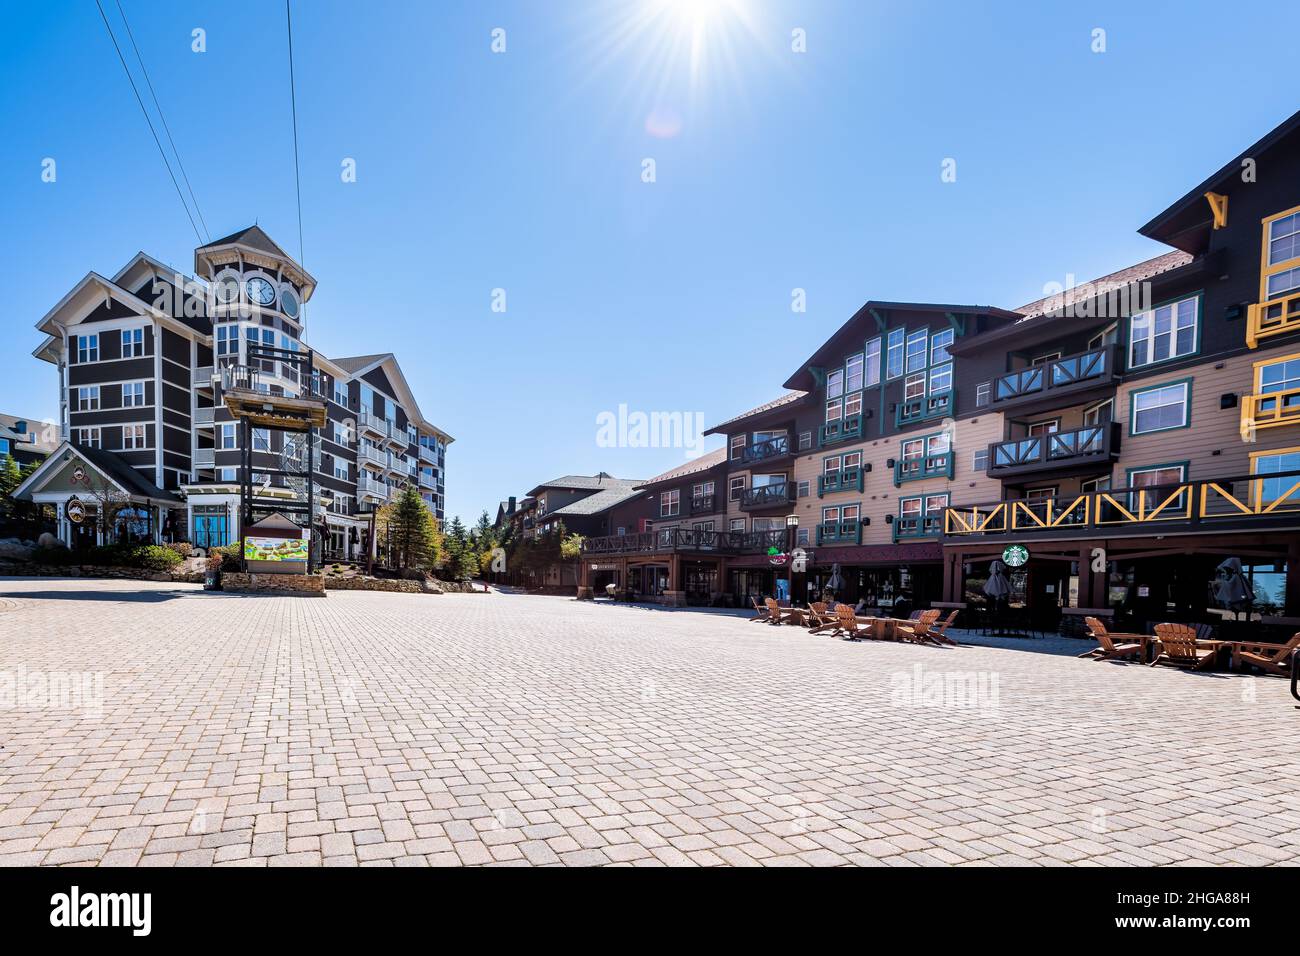 Snowshoe, USA - October 6, 2020: Wide angle view of cobbled square in Snow Shoe mountain town village store restaurant Starbucks coffee outside outdoo Stock Photo